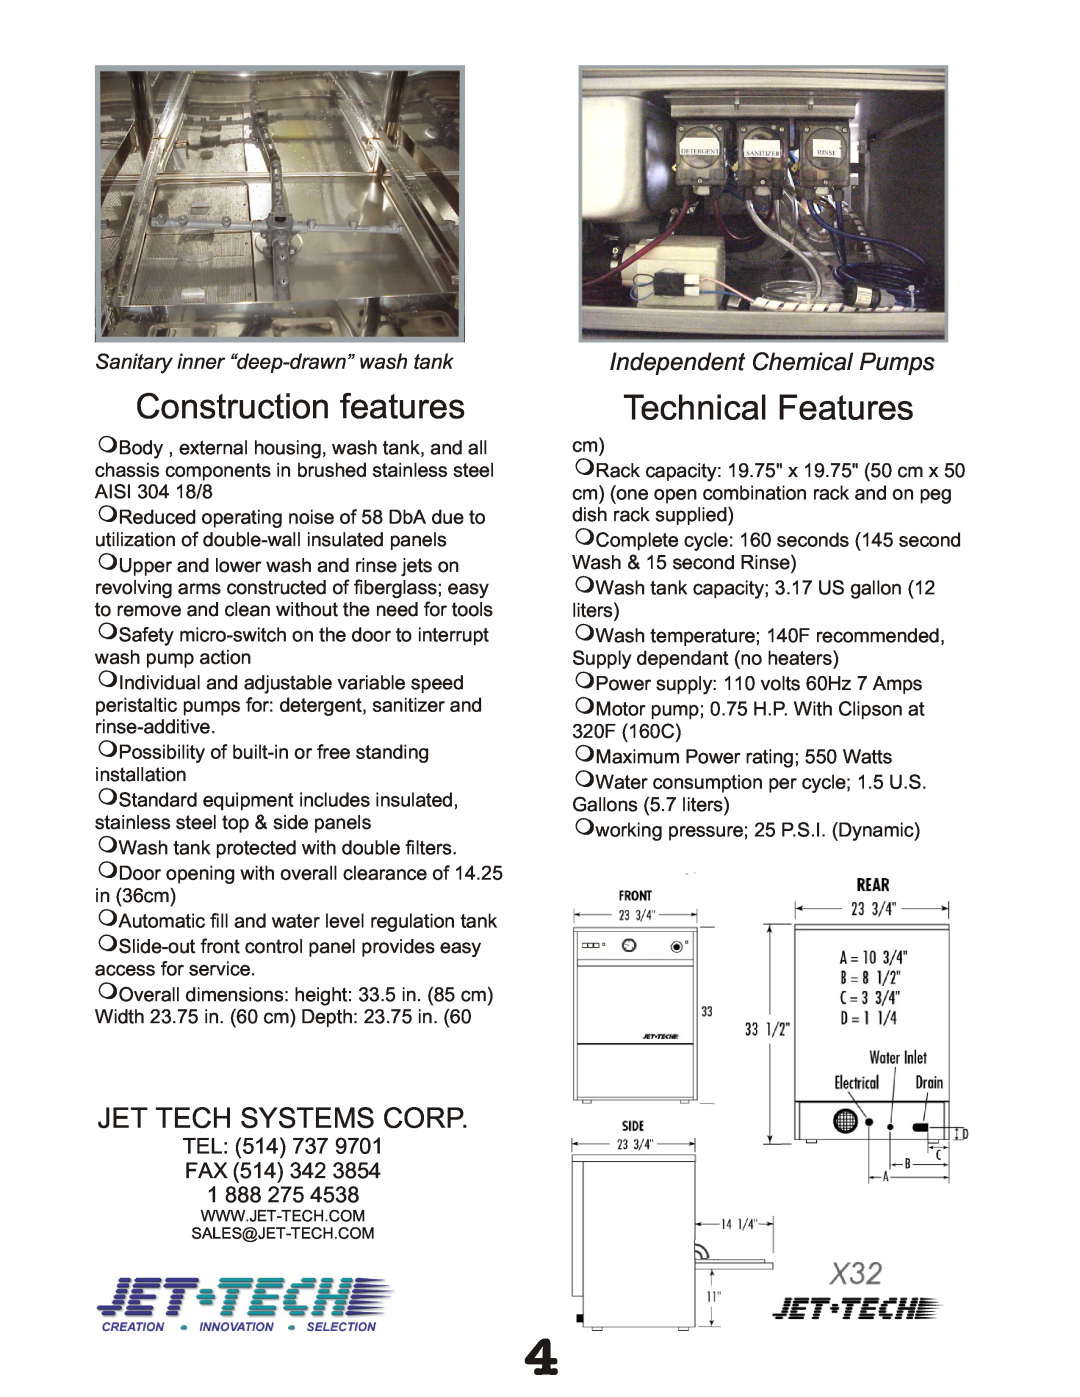 Jettech Metal Products X-32 Construction features, Technical Features, Jet Tech Systems Corp, Independent Chemical Pumps 